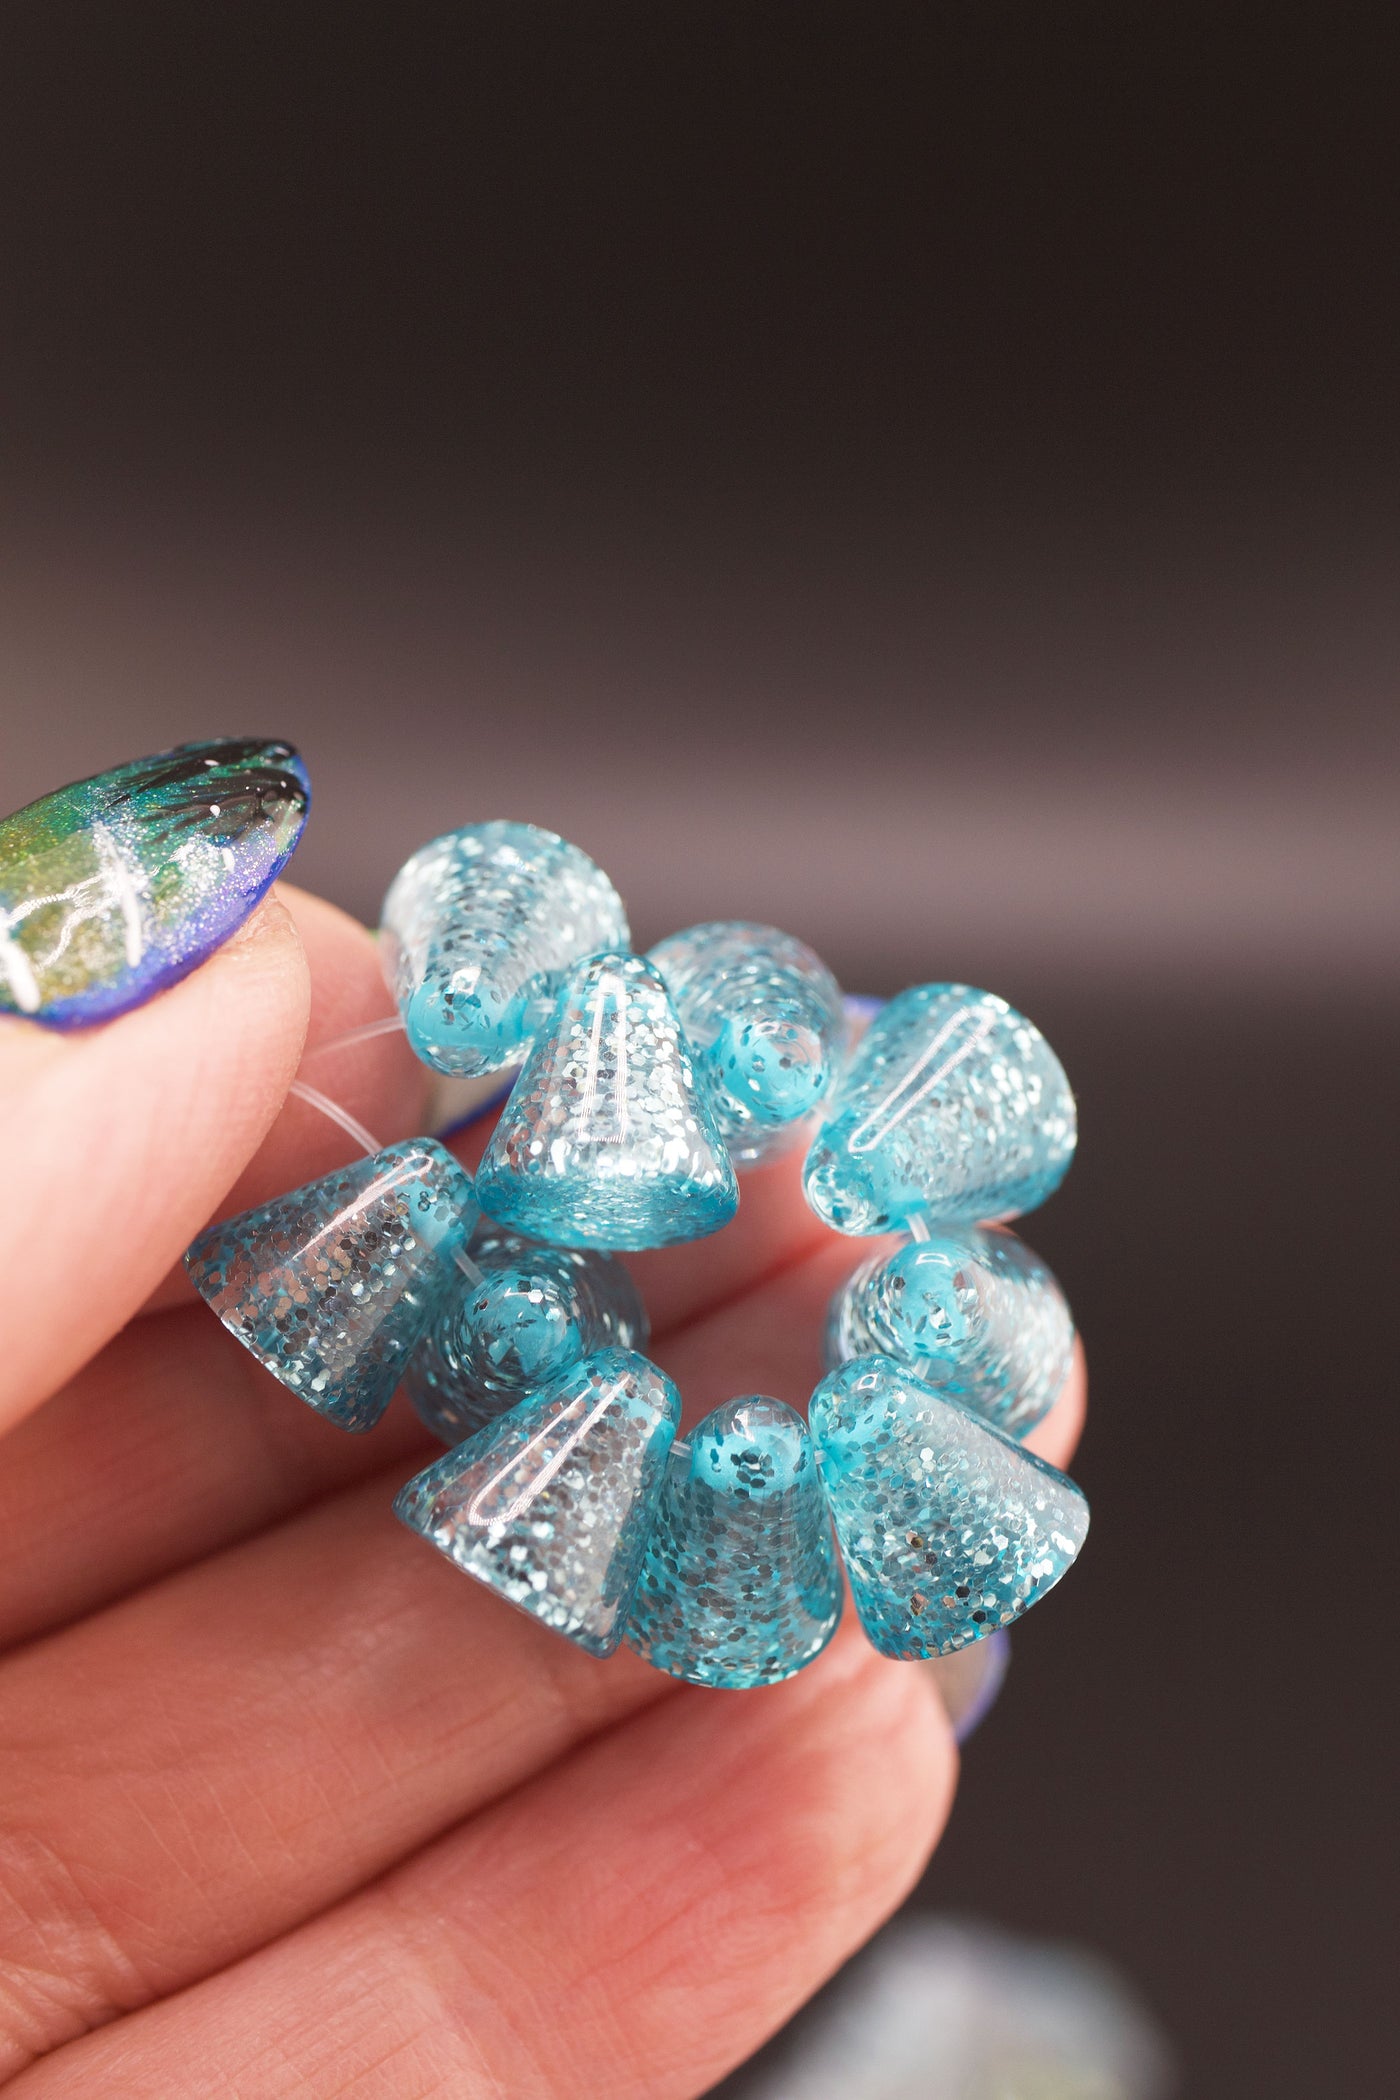 Dive into the ethereal beauty of the night sky with our Aurora Borealis Inspired Bead Collection.